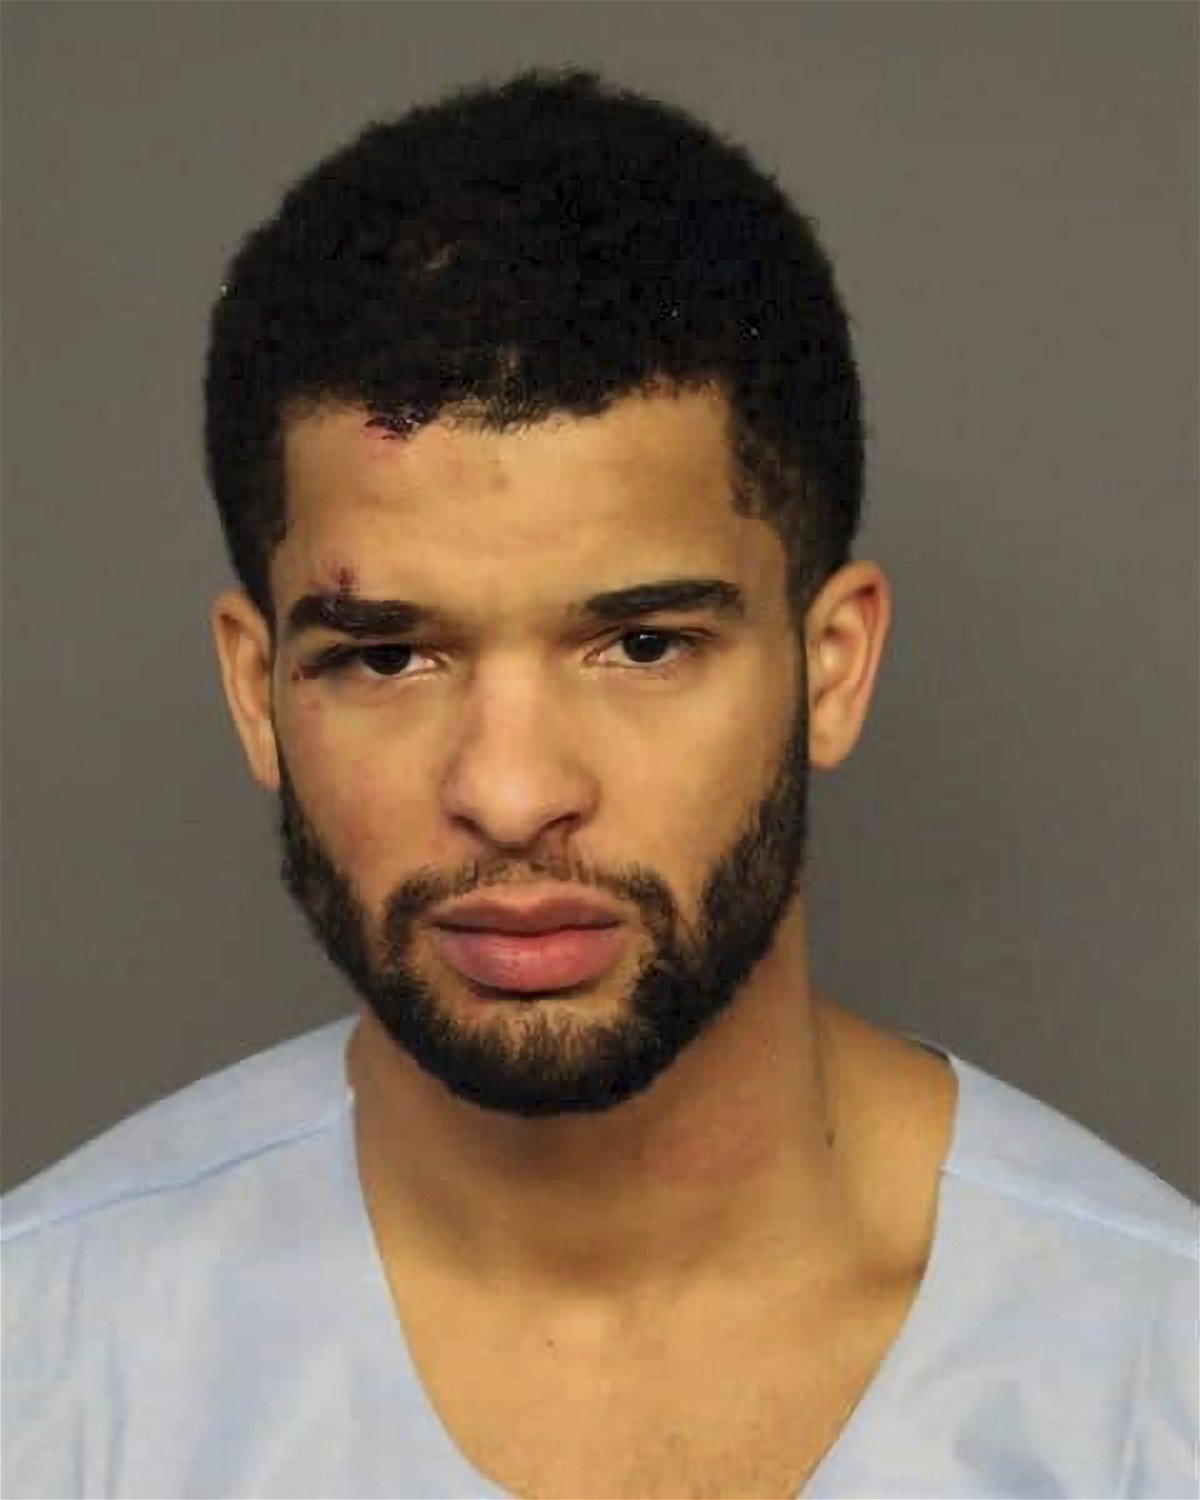 This undated photo provided by the Denver DA's Office shows Coban Porter, 21. University of Denver basketball player Coban Porter, the brother of Denver Nuggets star Michael Porter Jr., was charged Wednesday, Feb. 1, 2023, with felony counts of vehicular homicide and vehicular assault stemming from a suspected drunken-driving crash that killed a 42-year-old woman. 